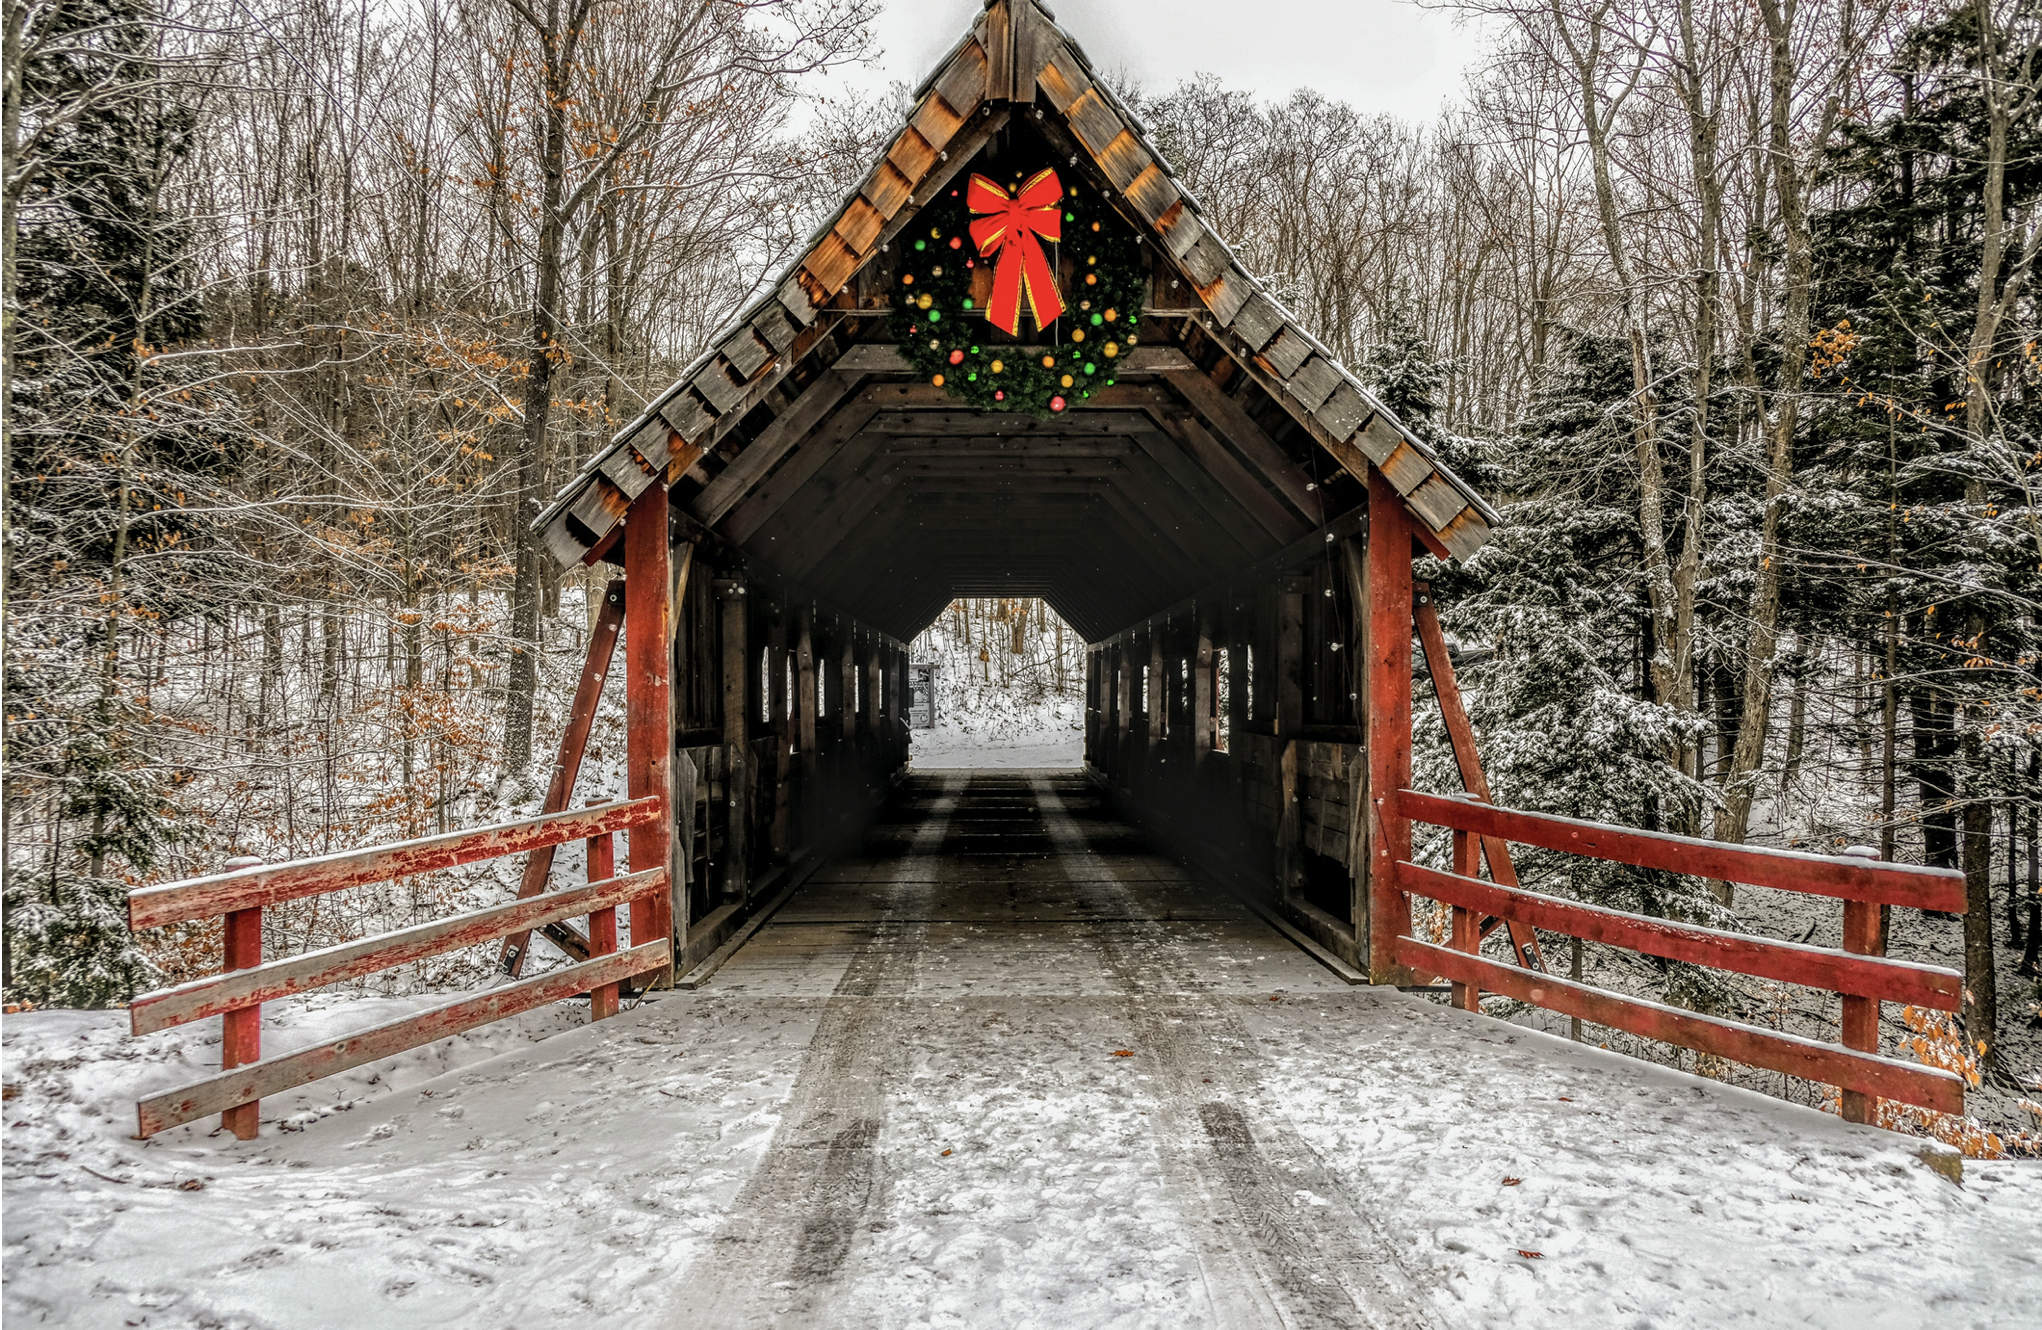 All Questions Answered: Christmas, Michigan